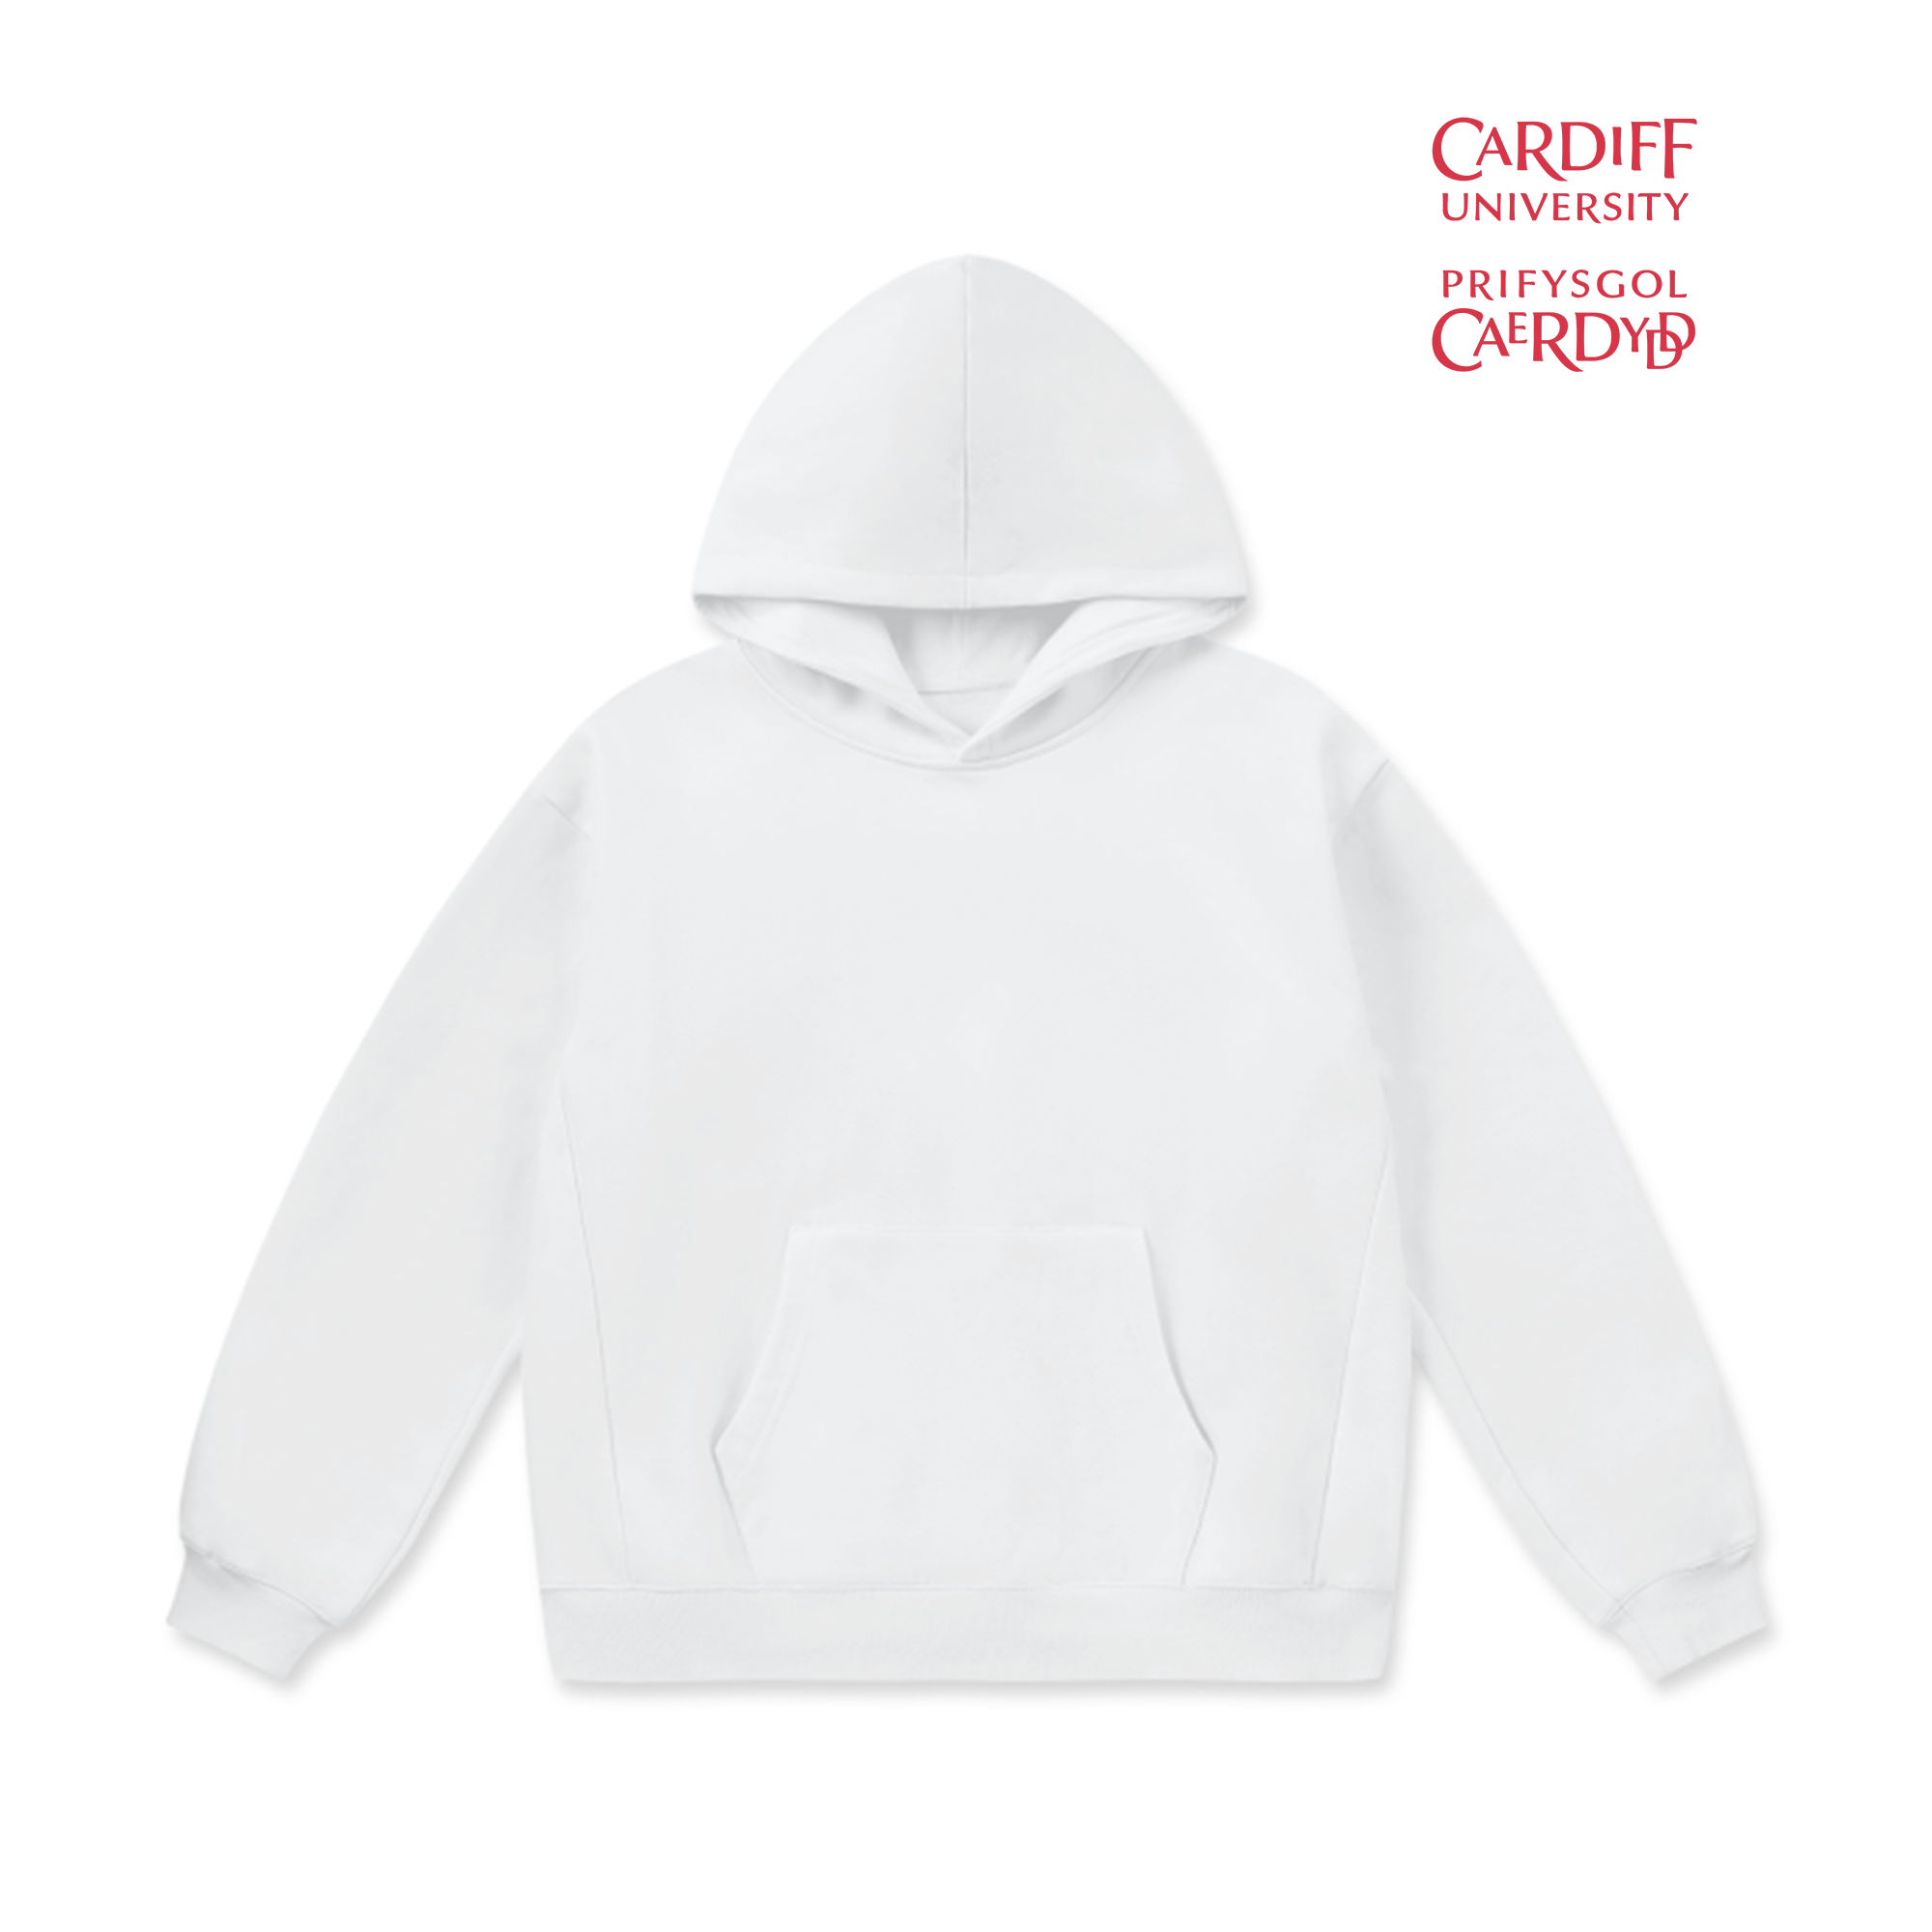 LCC Super Weighted Hoodie - Cardiff University (Modern Ver.2)